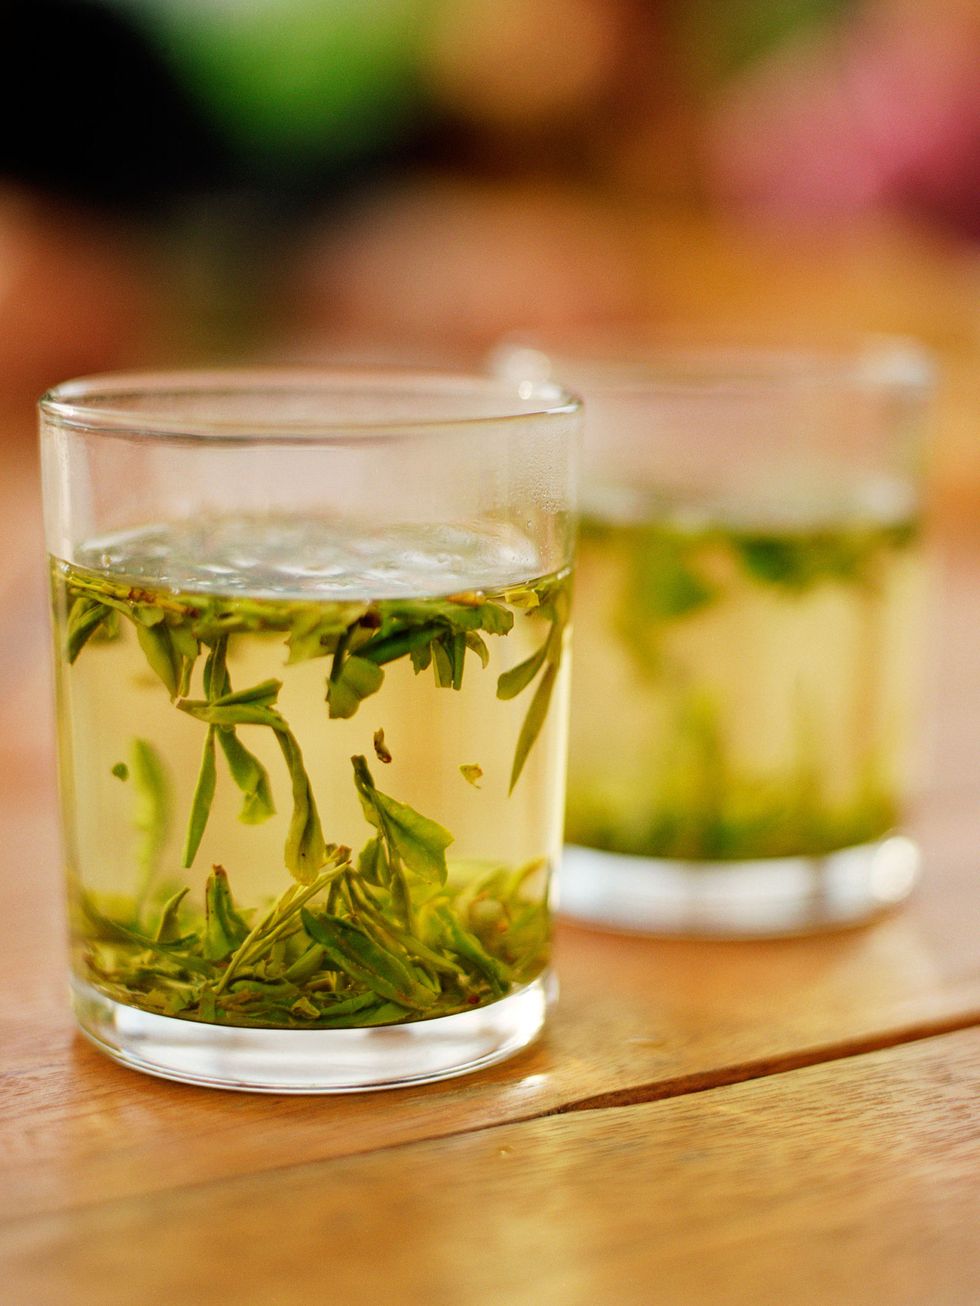 <p>This antioxidant-rich tea has multiple health benefits, including boosting metabolism, says registered dietitian nutritonist <a href="jackienewgent.com">Jackie Newgent</a>, author of <em>The With or Without Meat Cookbook</em>. &ldquo;It&rsquo;s because green tea contains plant-based compounds called catechins.&rdquo; Not only have these compounds <a href="http://www.ncbi.nlm.nih.gov/pubmed/21115335">been found</a> to reduce body weight and fat, but the caffeine in green tea also acts as a stimulant that can increase the amount of energy your body uses. And then there&rsquo;s the H20. &ldquo;<a href="http://www.ncbi.nlm.nih.gov/pubmed/20796216">Drinking water</a> may promote thermogenesis&mdash;the production of heat caused by the metabolizing of food&mdash;and play a role in reducing calorie intake,&rdquo; adds Newgent.&nbsp;</p>